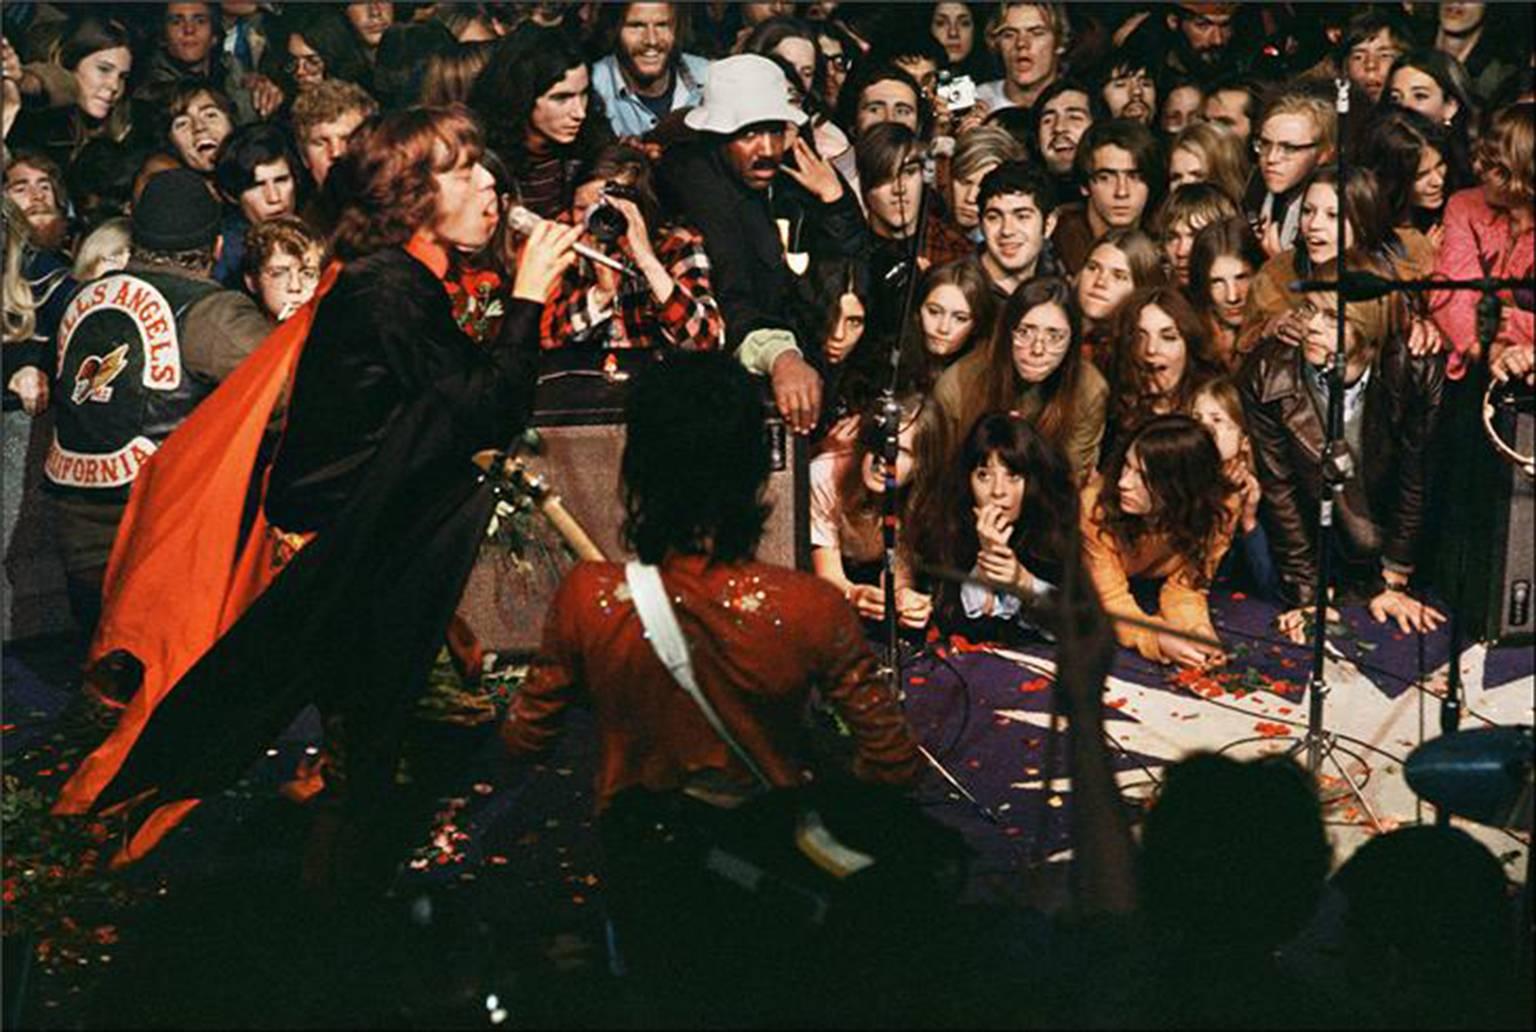 Ethan Russell Color Photograph - Mick Jagger, Altamont, CA 1969